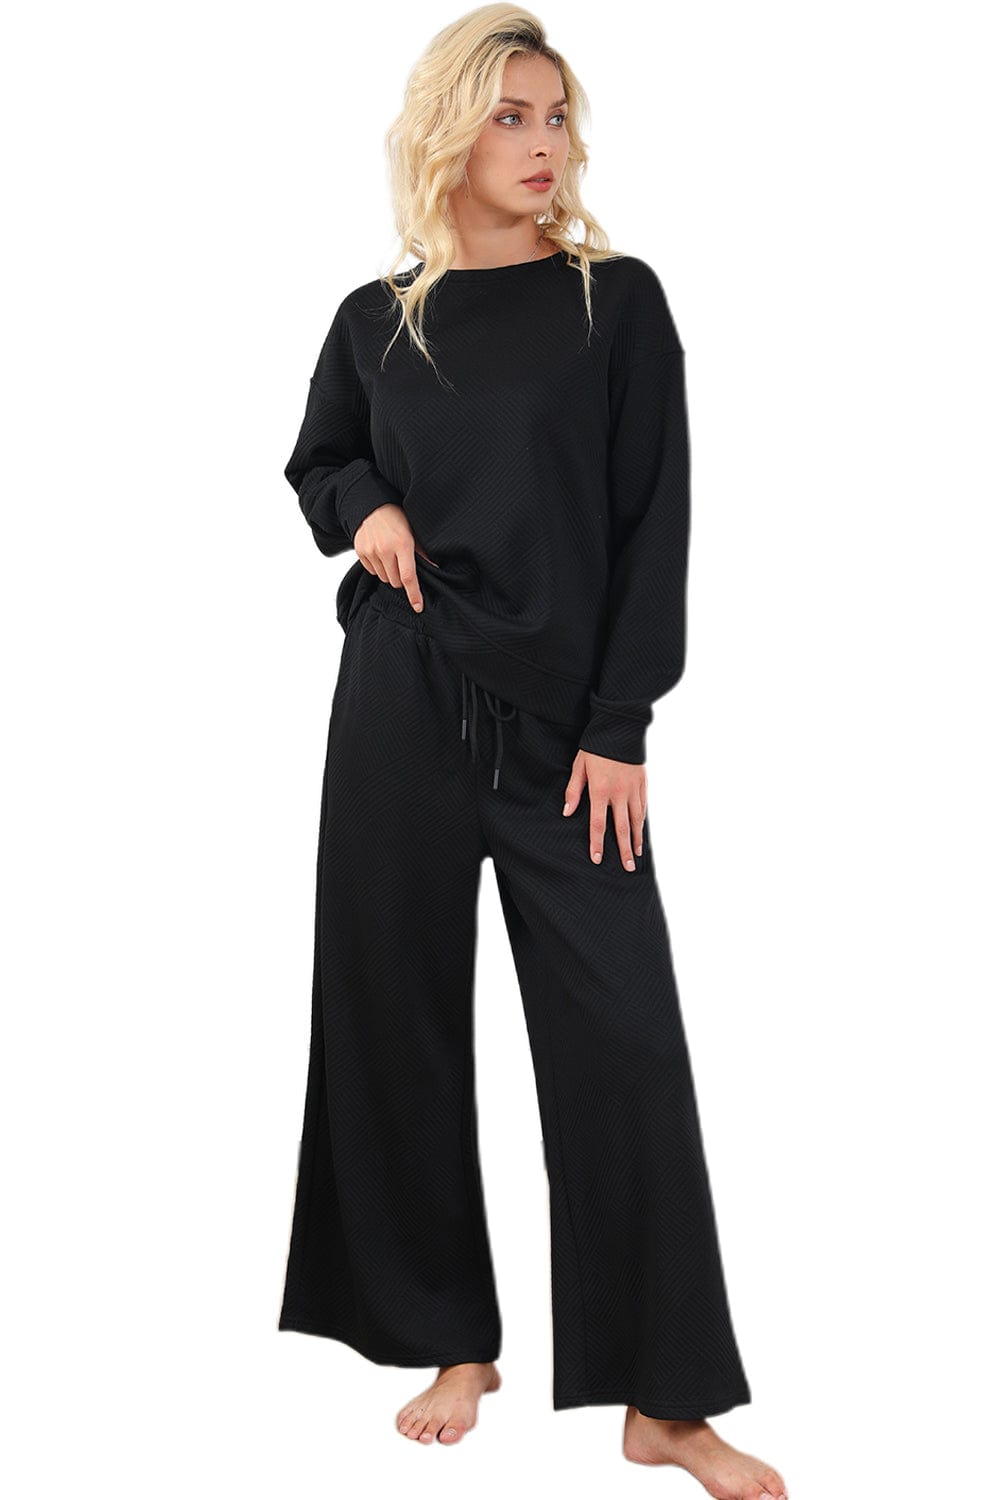 Black Ultra Loose Textured 2pcs Slouchy Outfit Loungewear Alpha C Apparel